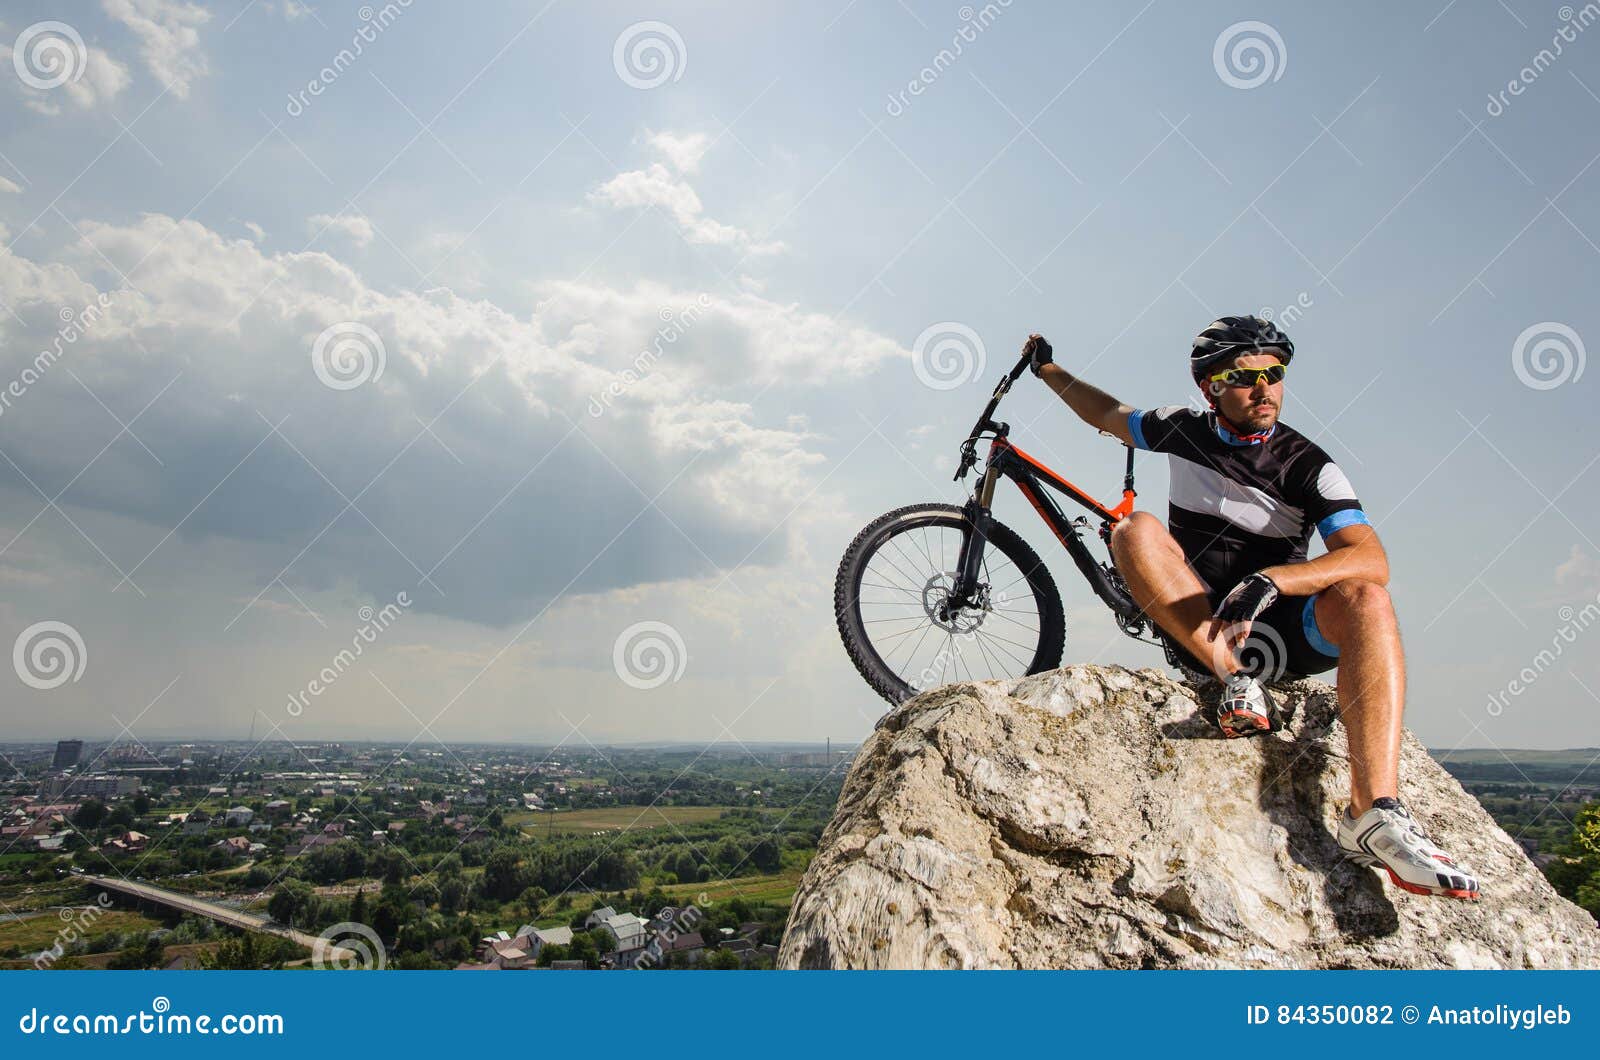 Handsome Guy with Bike on Top of the Mountain Stock Photo - HanDsome Guy Bike Top Mountain 84350082